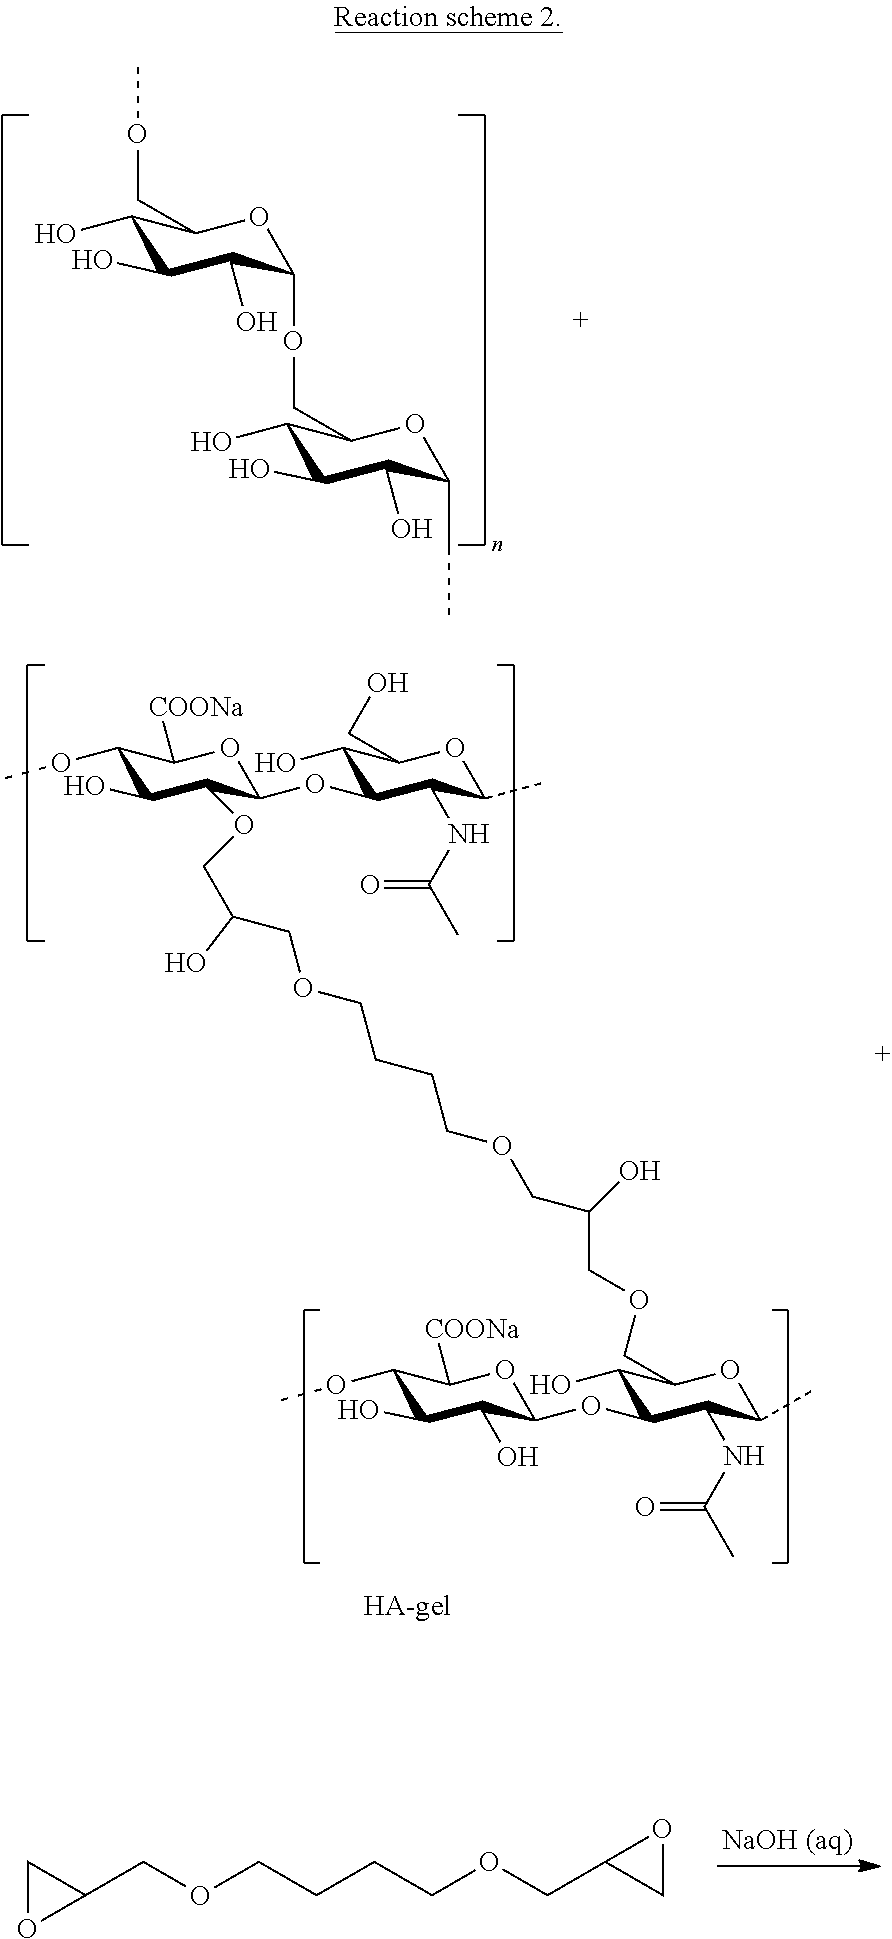 Mixed hydrogels of hyaluronic acid and dextran